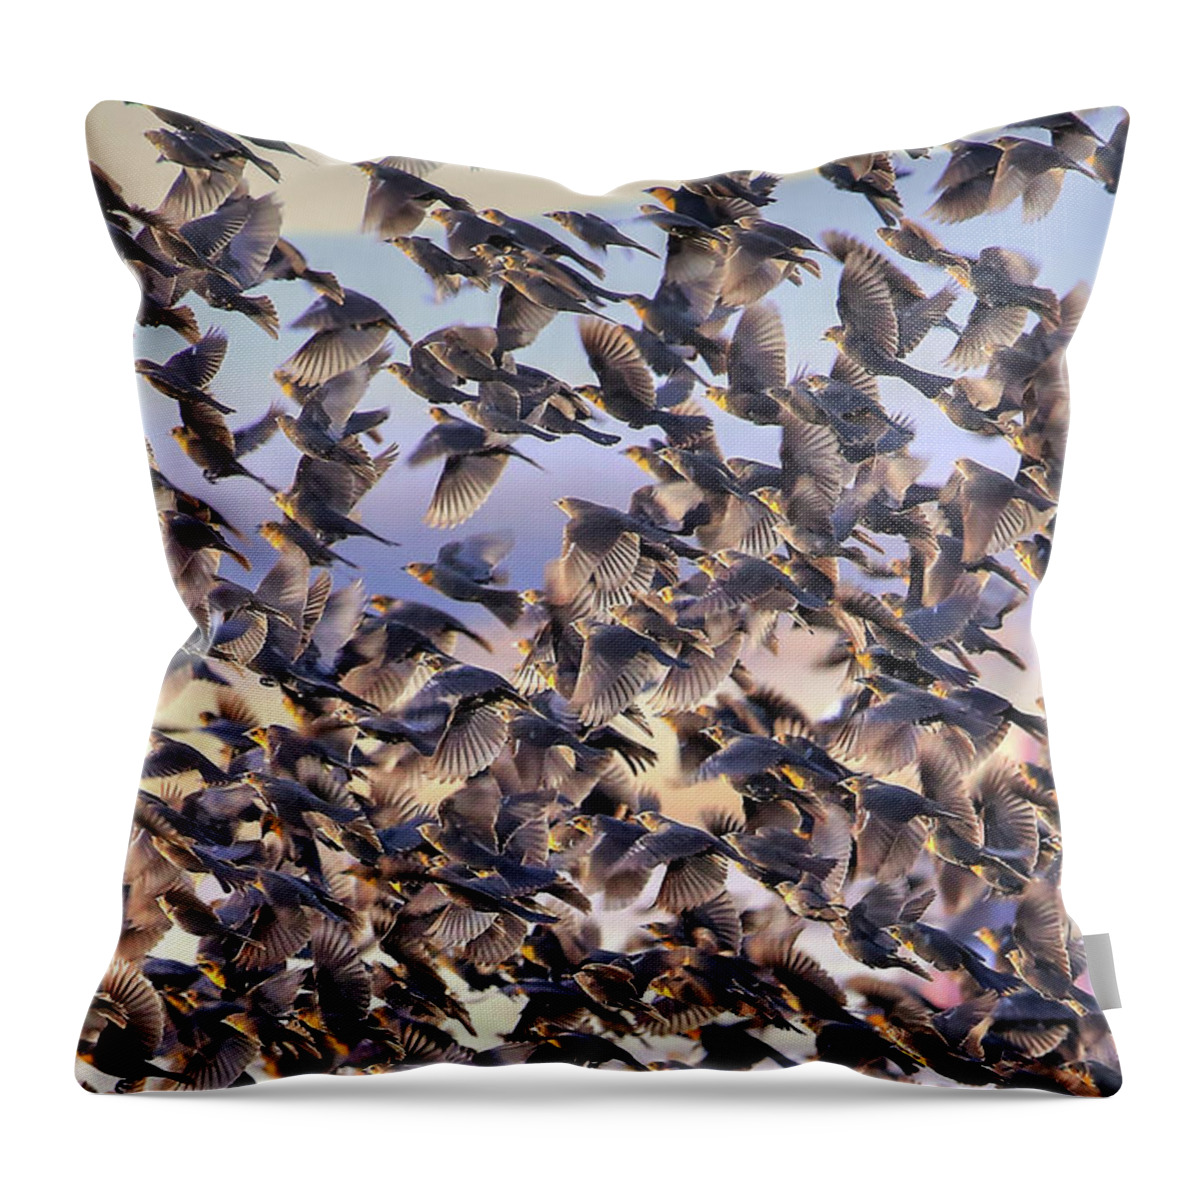 Birds Throw Pillow featuring the photograph Controled Chaos by Robert Harris